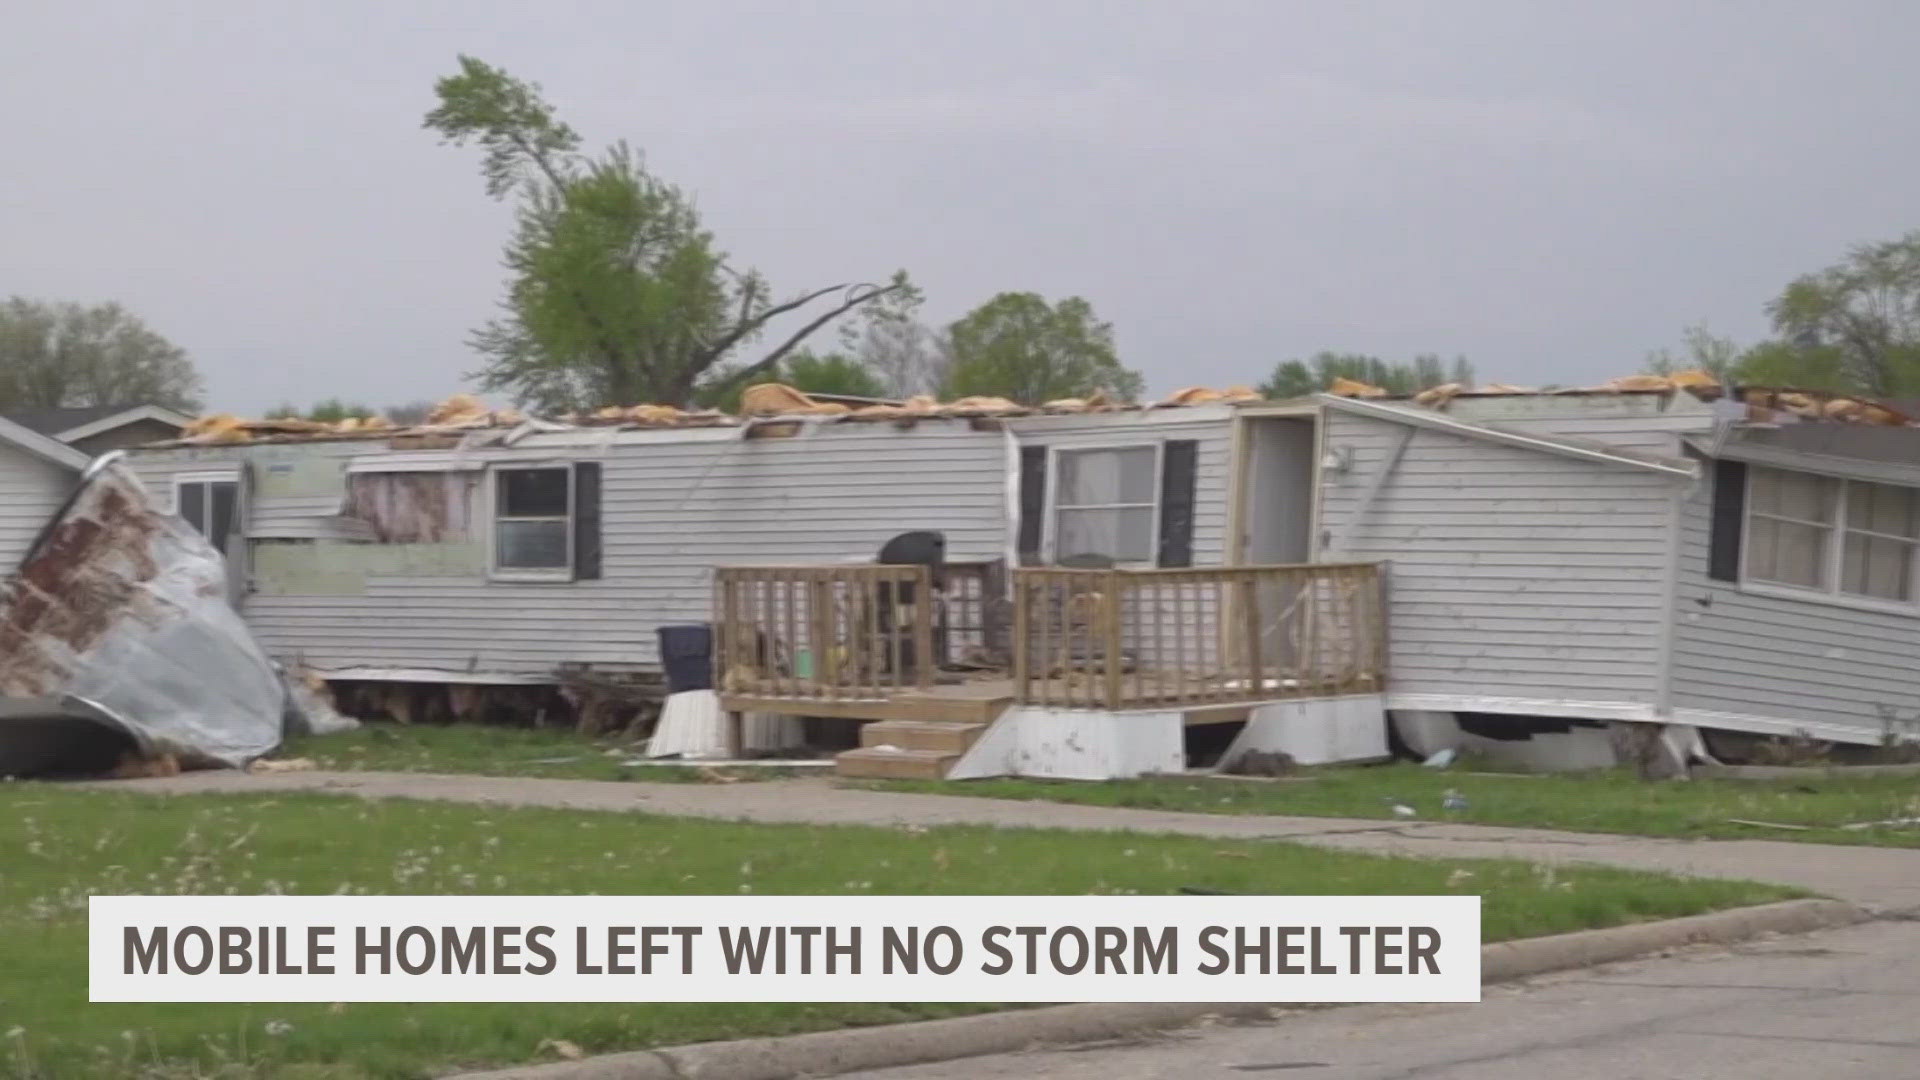 Jasper County has already been hit with two tornadoes this year, and residents at Sunrise Terrace in Newton have utilized the now-closed storm shelter both times.